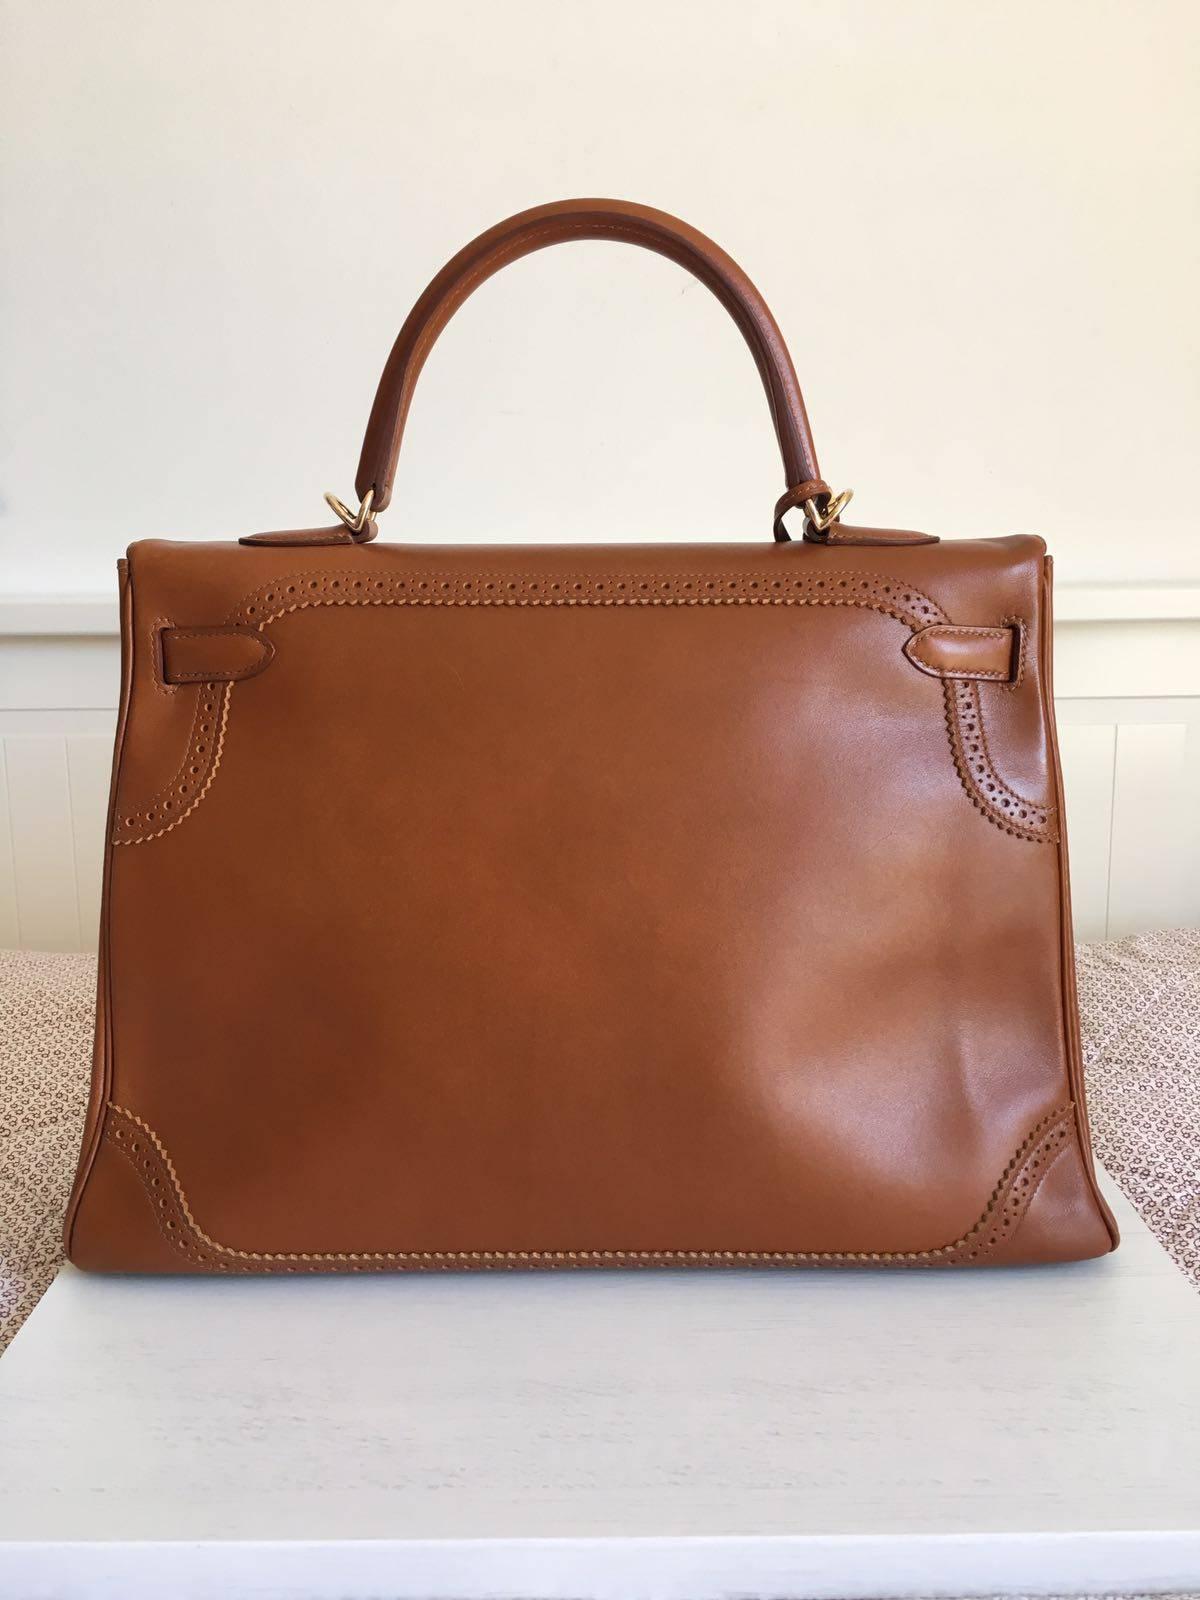 Stunning and so beautiful Authentic Hermes Bag

"KELLY GHILLIES"

Made in France

Stamp P in a square (2012)

Made of Tadelakt Leather and Permabrass (Golden) Hardware

Colorway: Fauve

Lined with same colorway leather

Tadelakt is a